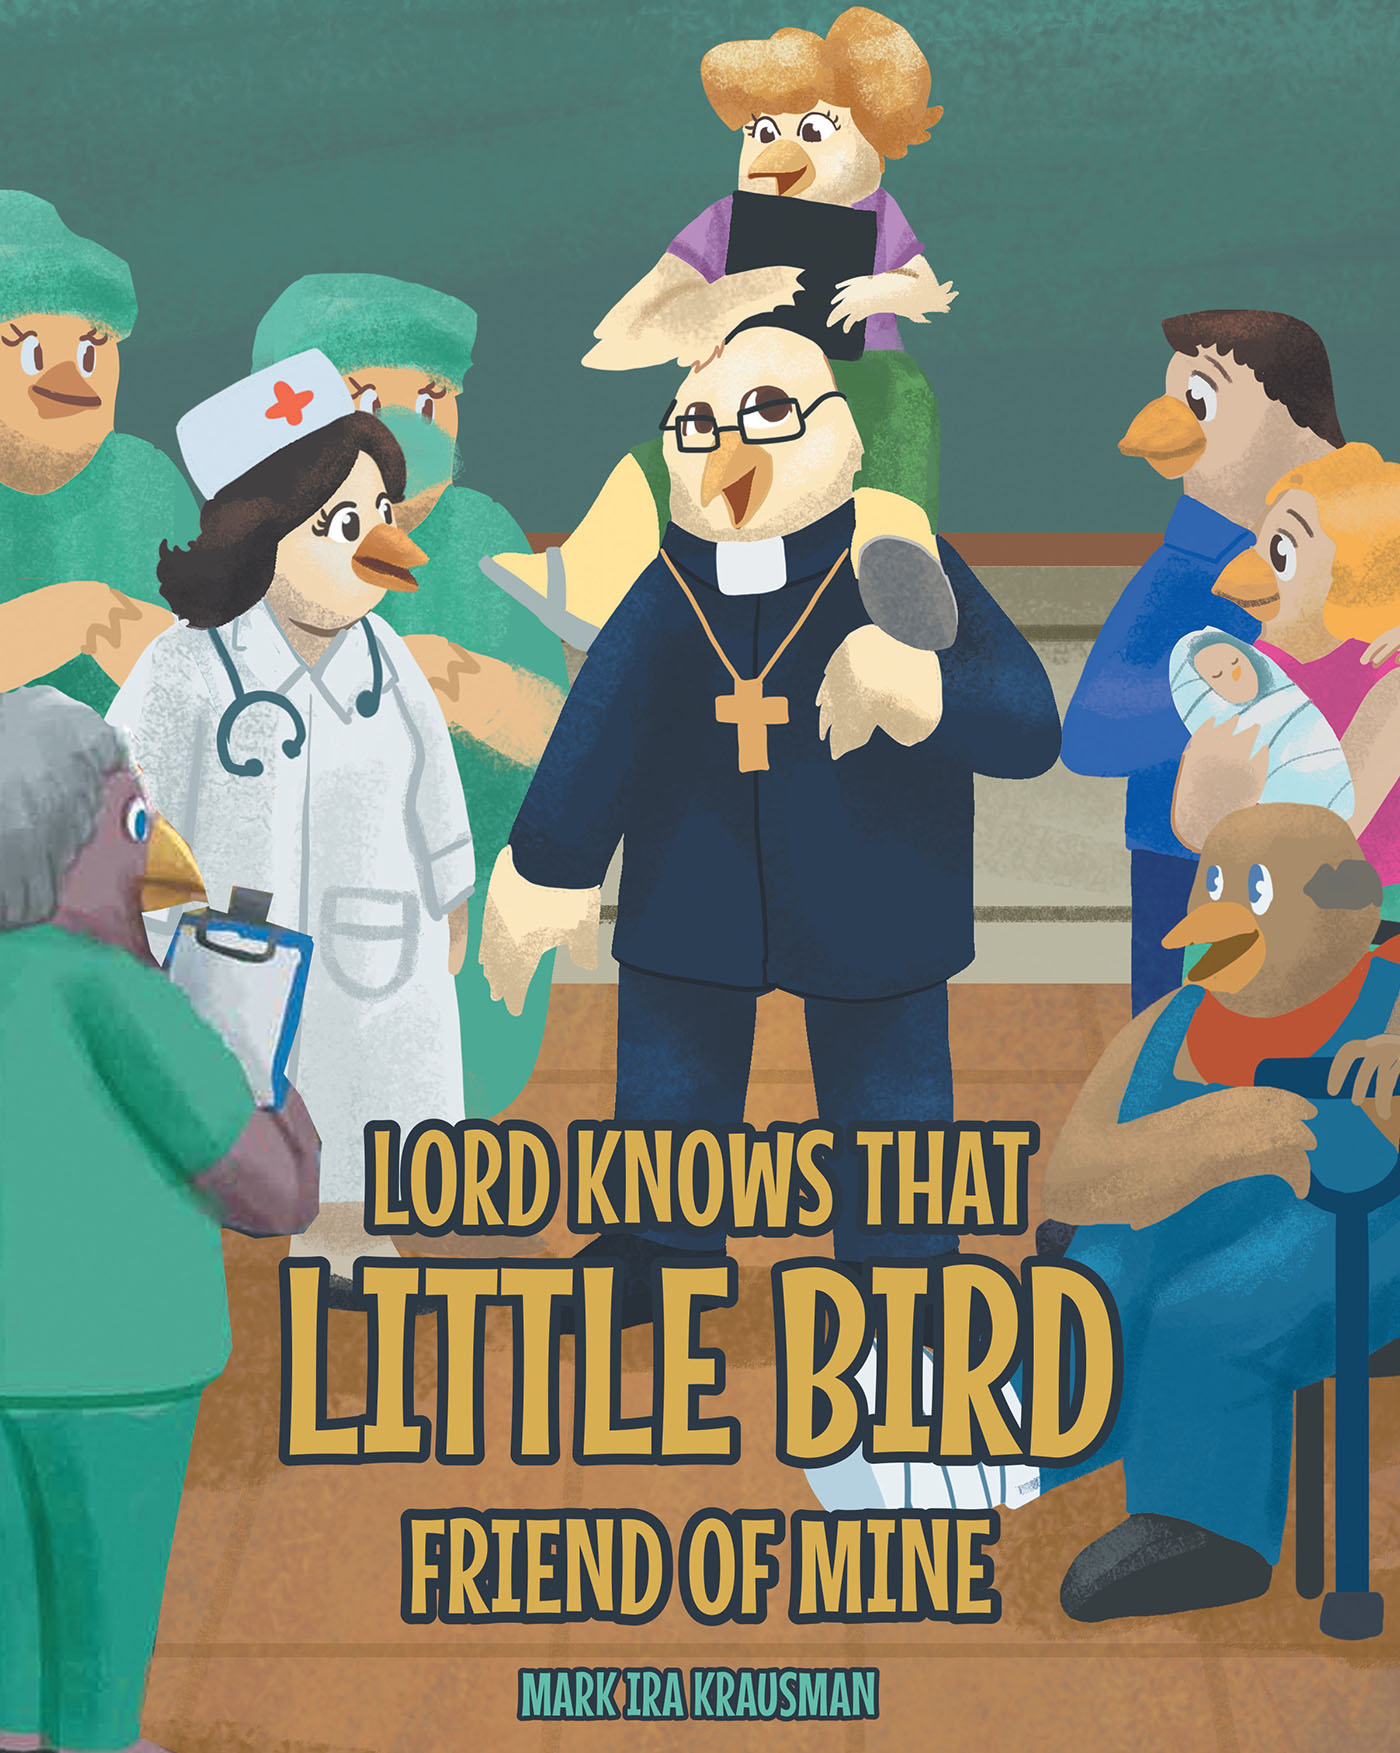 Author Mark Ira Krausman’s New Book, "Lord Knows that Little Bird Friend of Mine," Follows a Young Girl Who Journals Her Experiences and Follows Christ's Teachings